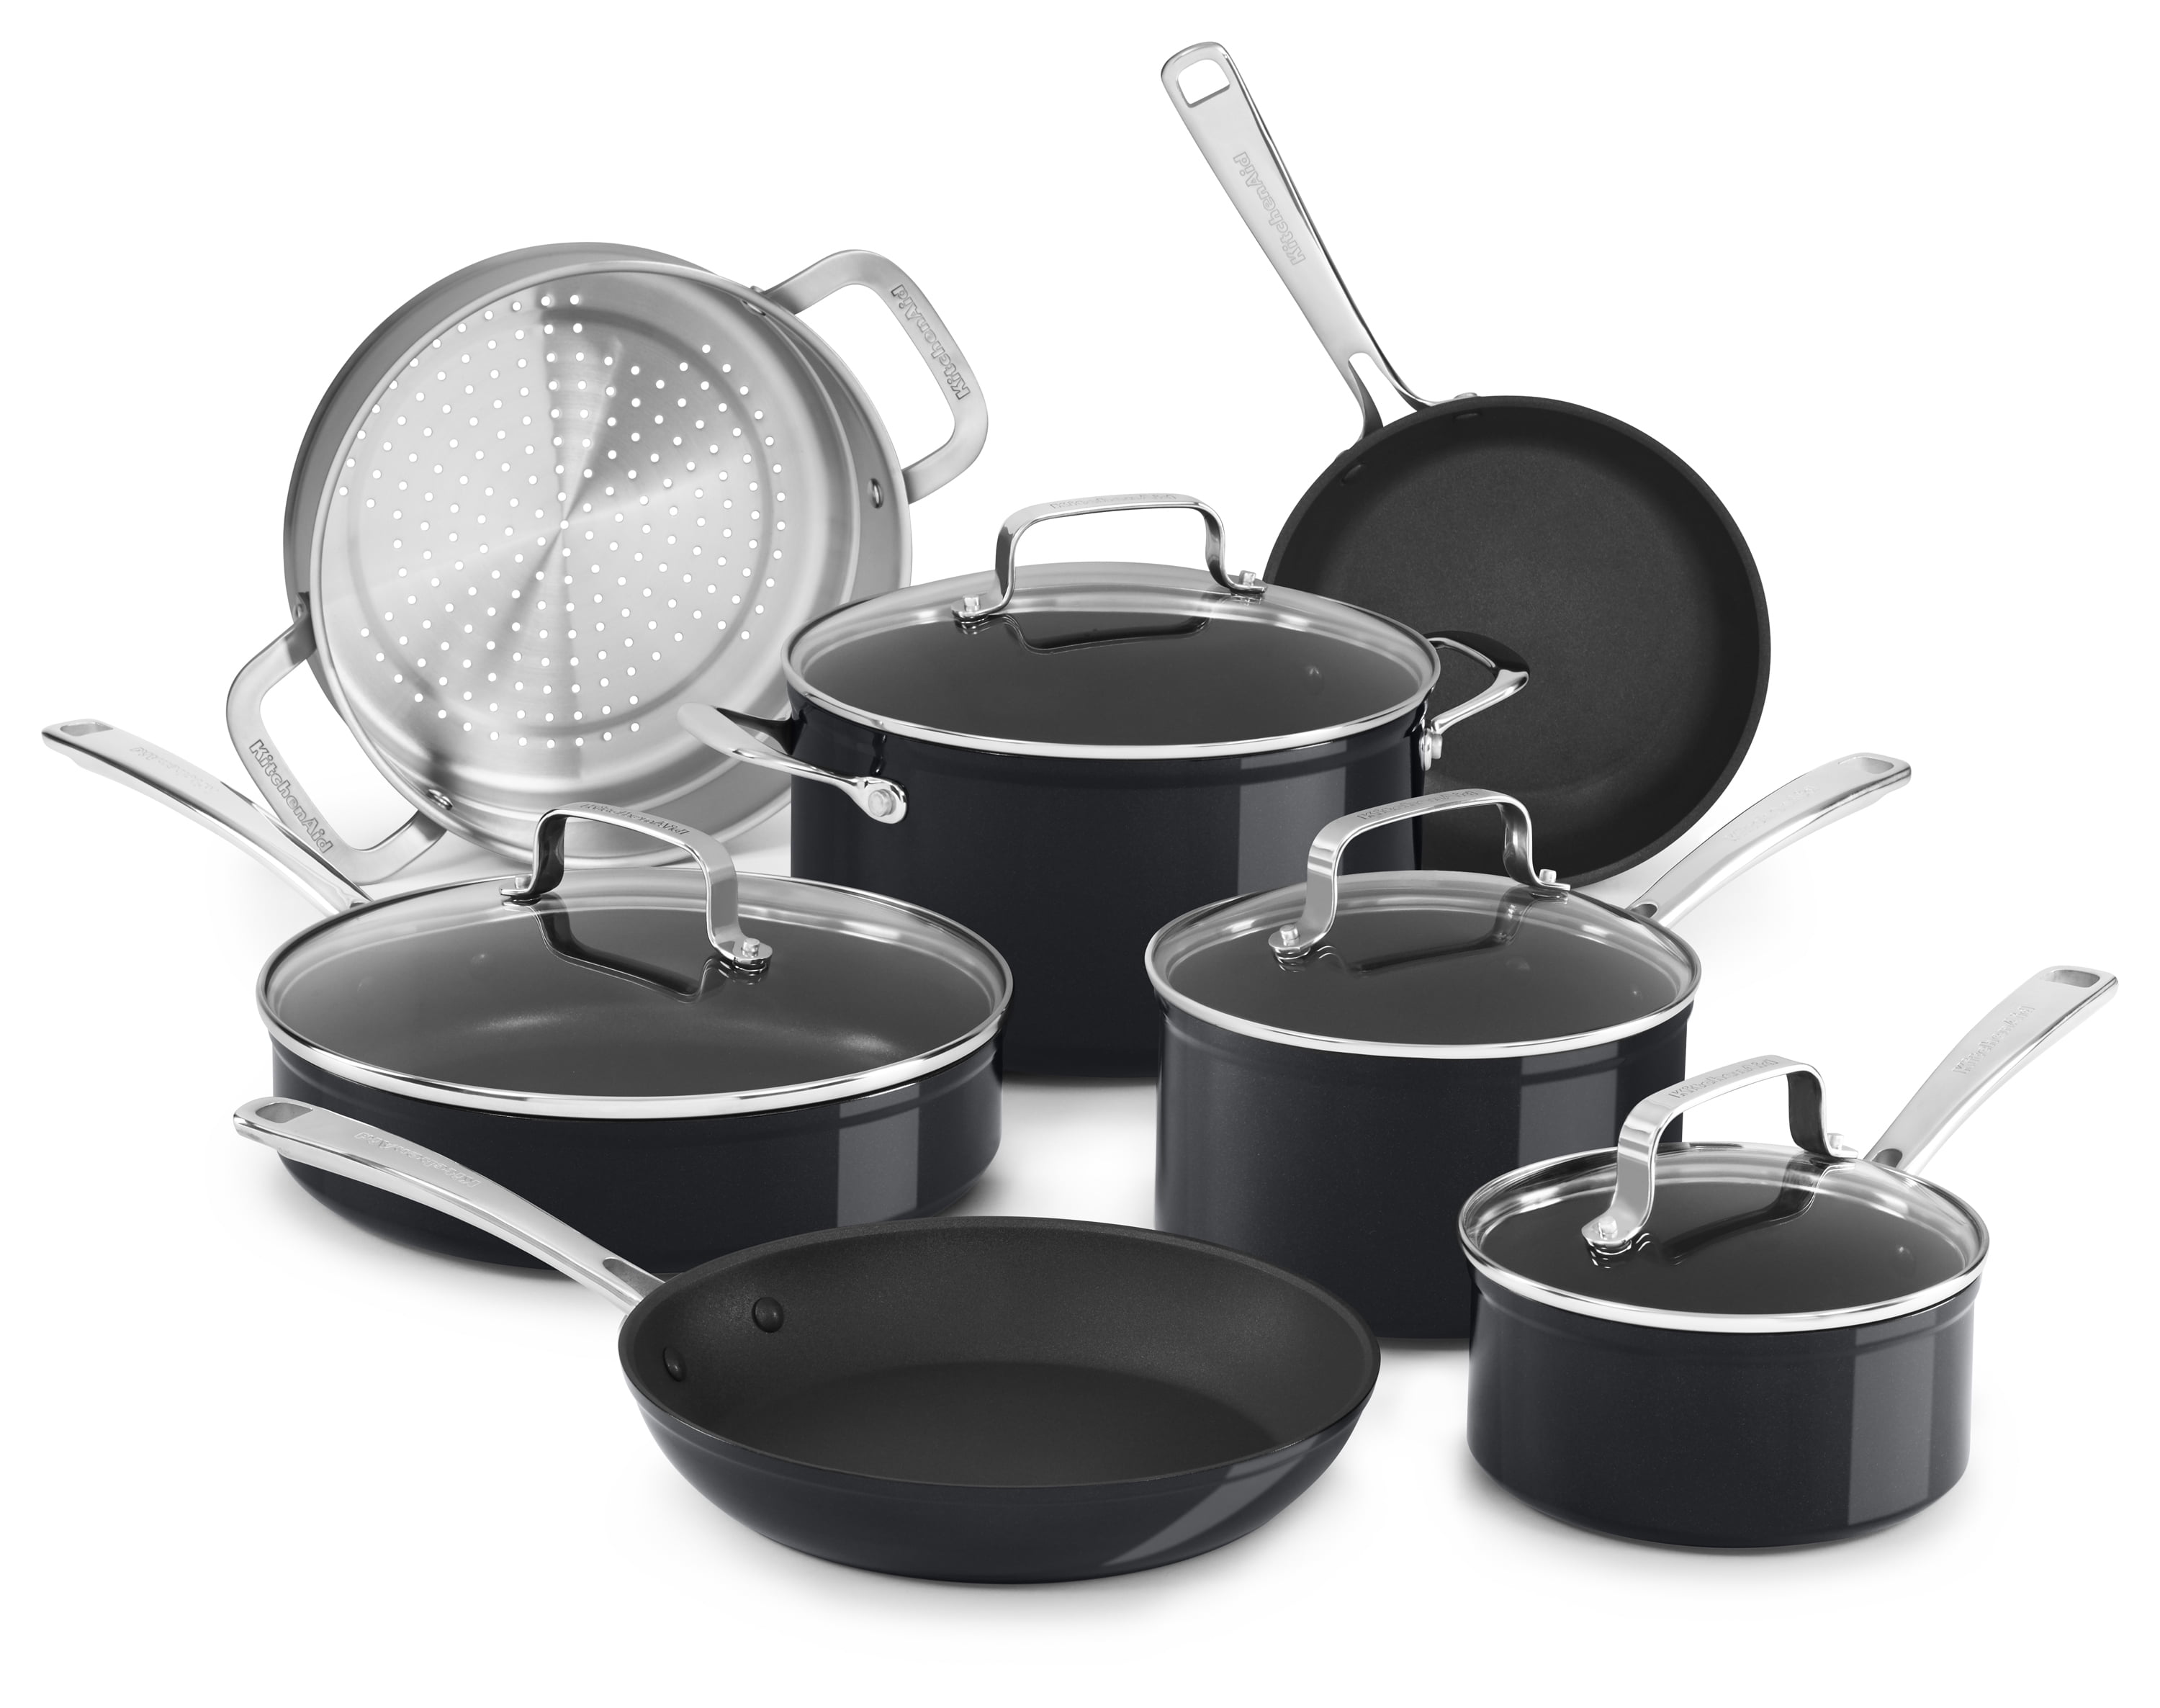 KitchenAid Hard Anodized Nonstick 5-Piece Cookware, Set A in Midnight Black  - Bed Bath & Beyond - 14341709